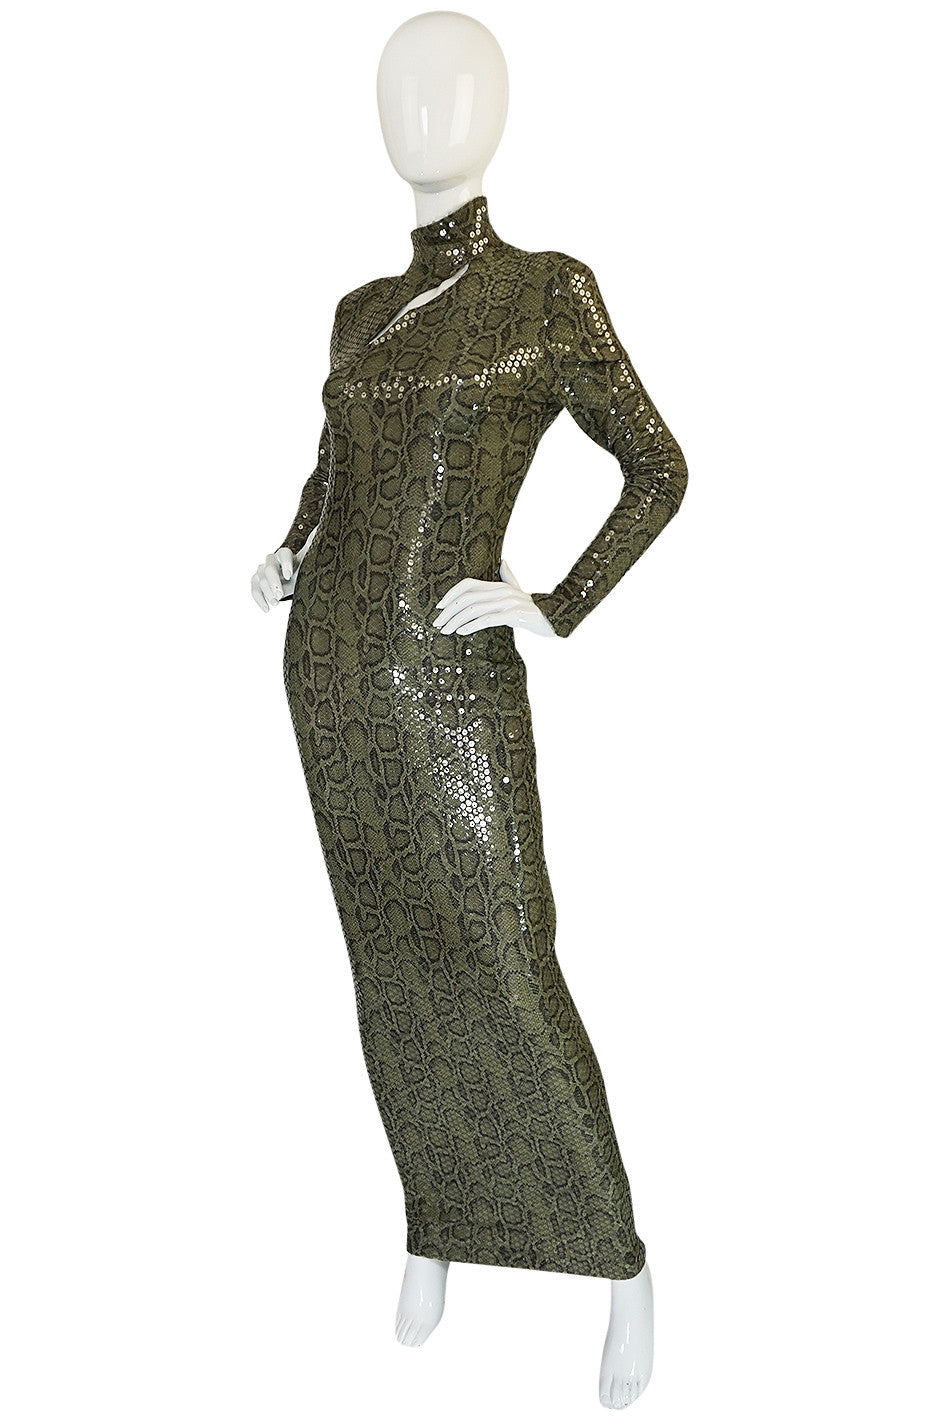 Iconic S/S 1983 Thierry Mugler Sequin Snakeskin Python Dress ...